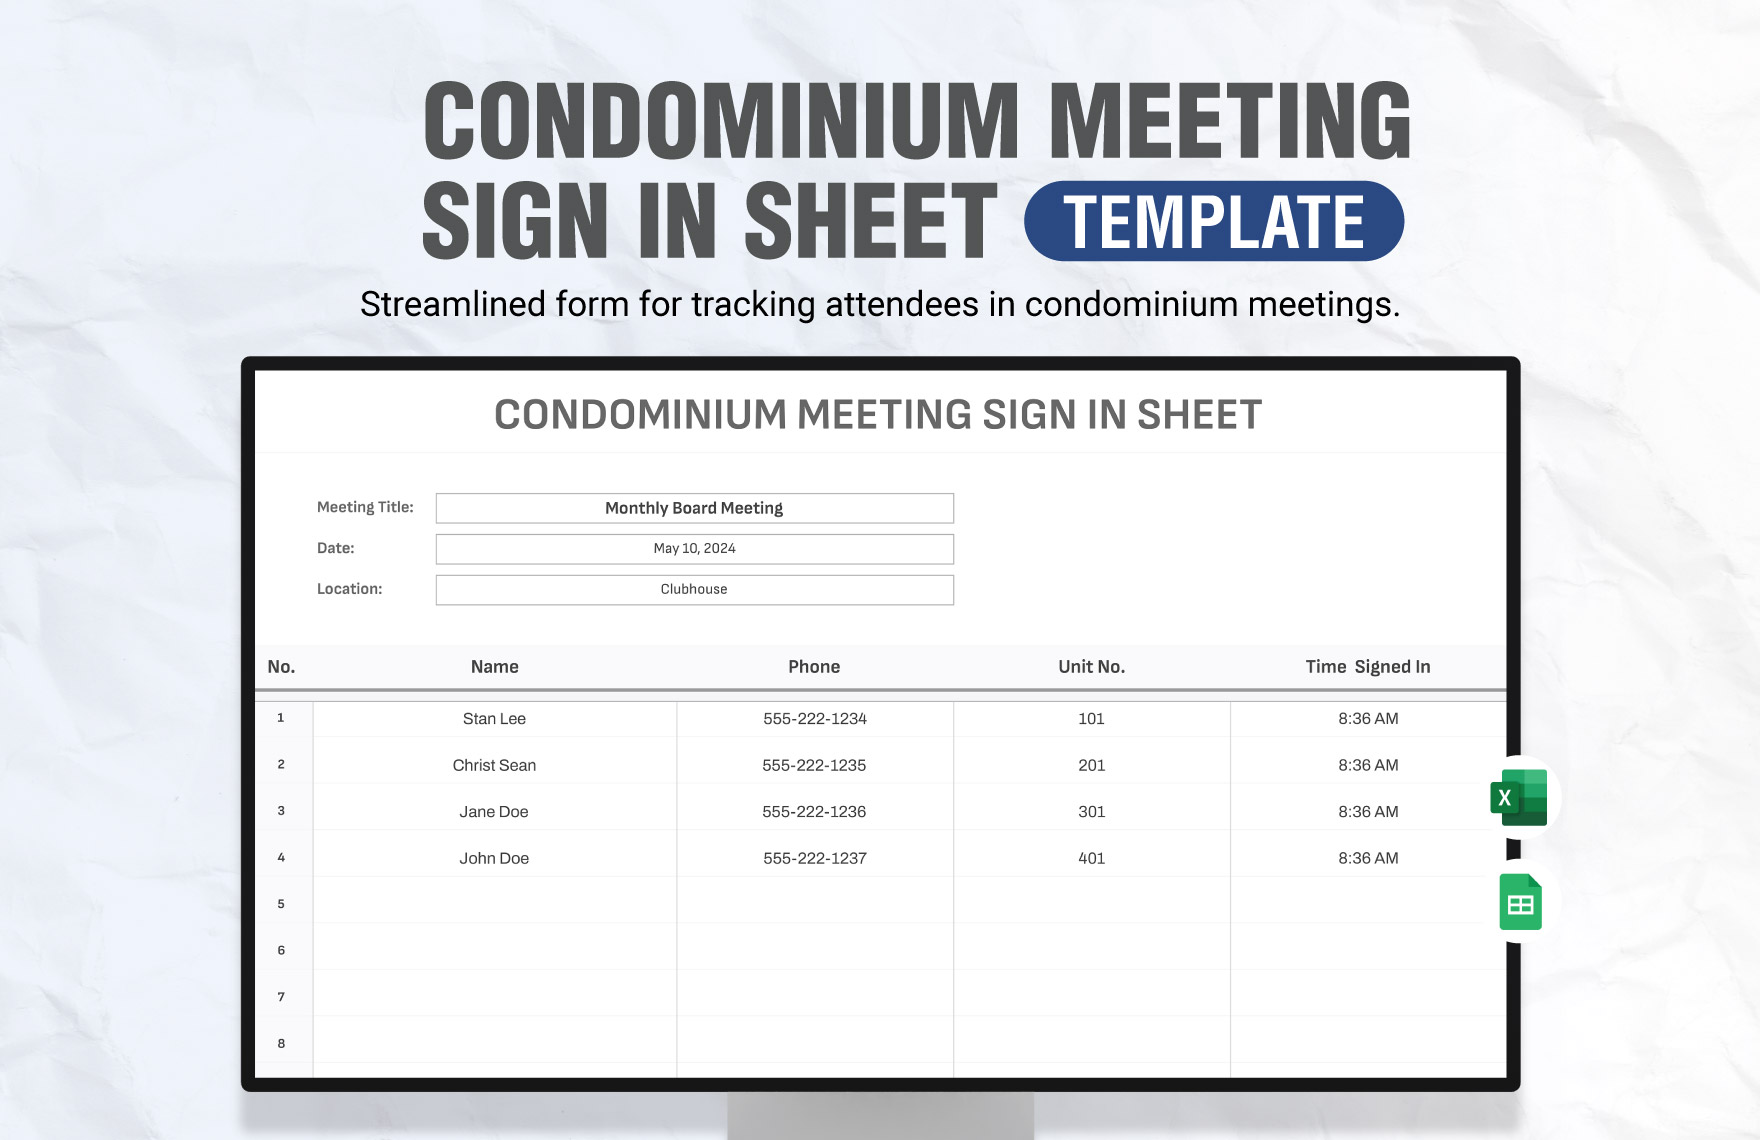 Free Condominium Meeting Sign in Sheet Template in Excel, Google Sheets